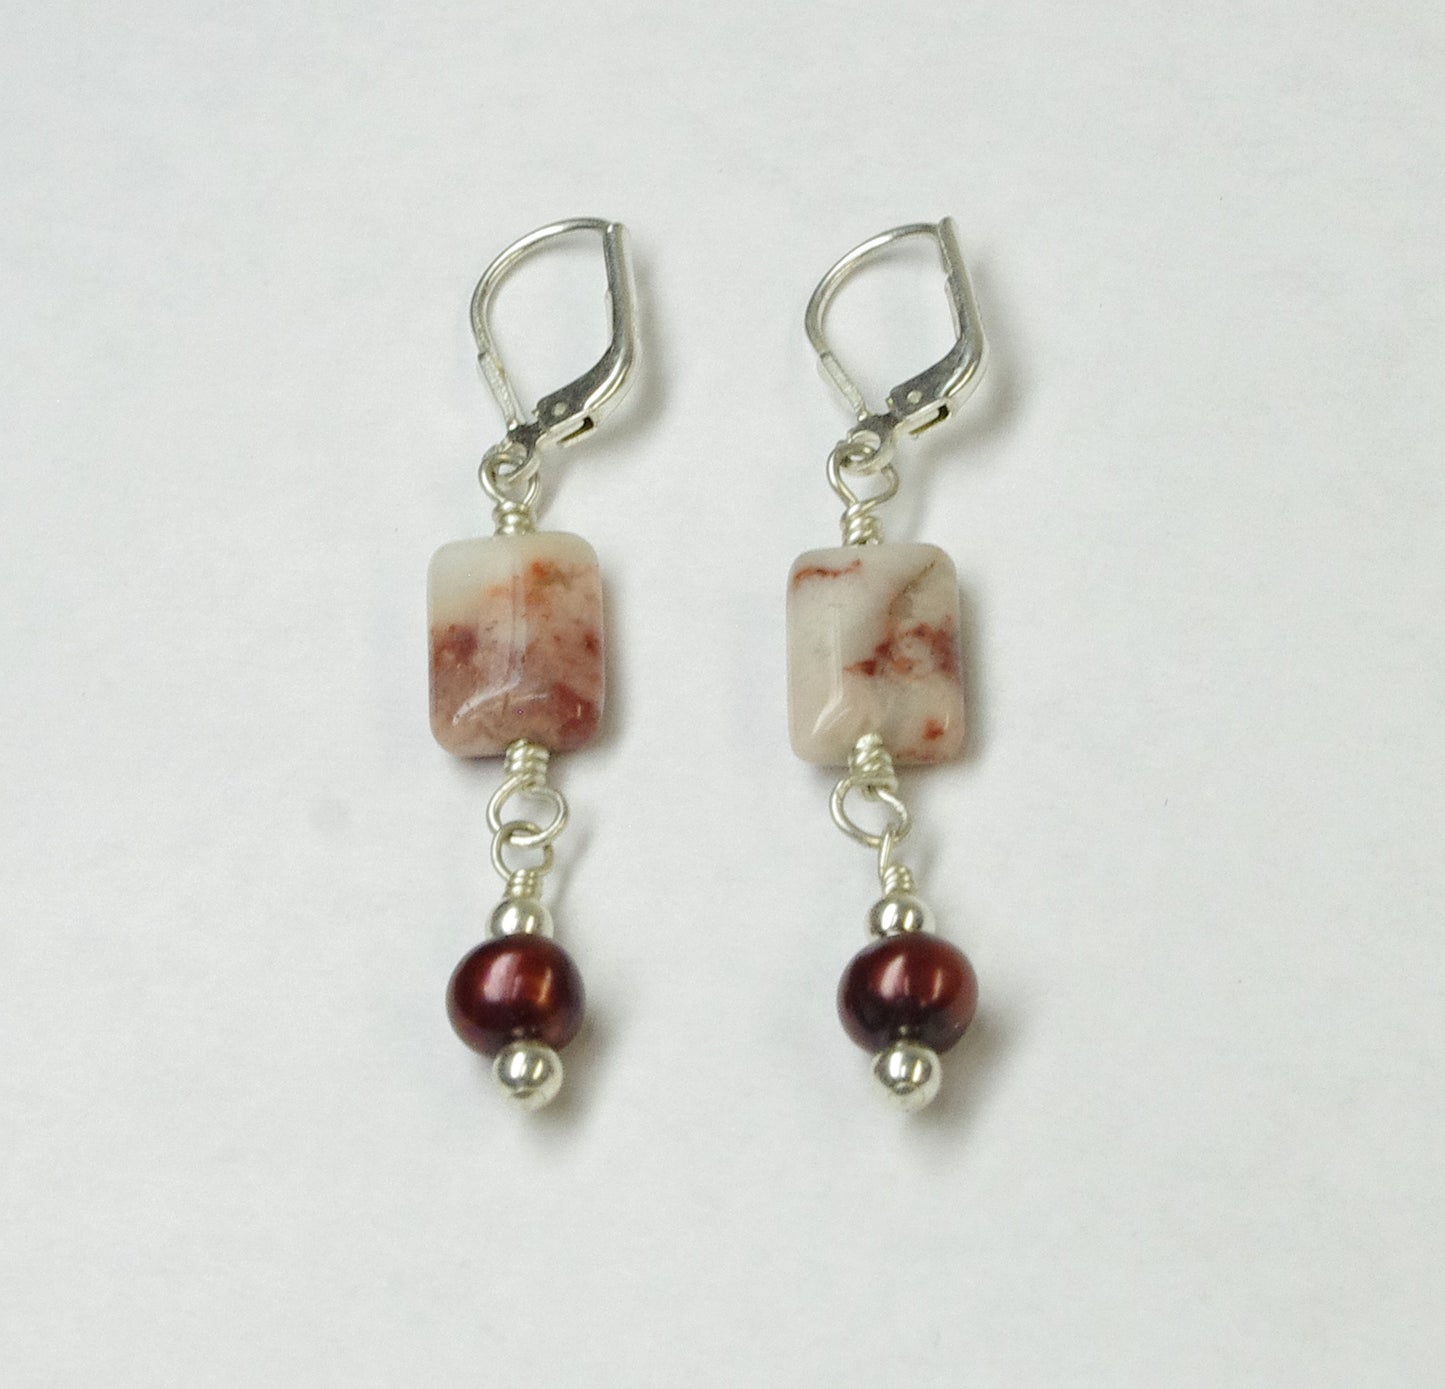 Dyed Black Cherry Pearl and Black Cherry Pink Lace Agate Sterling Silver Earrings